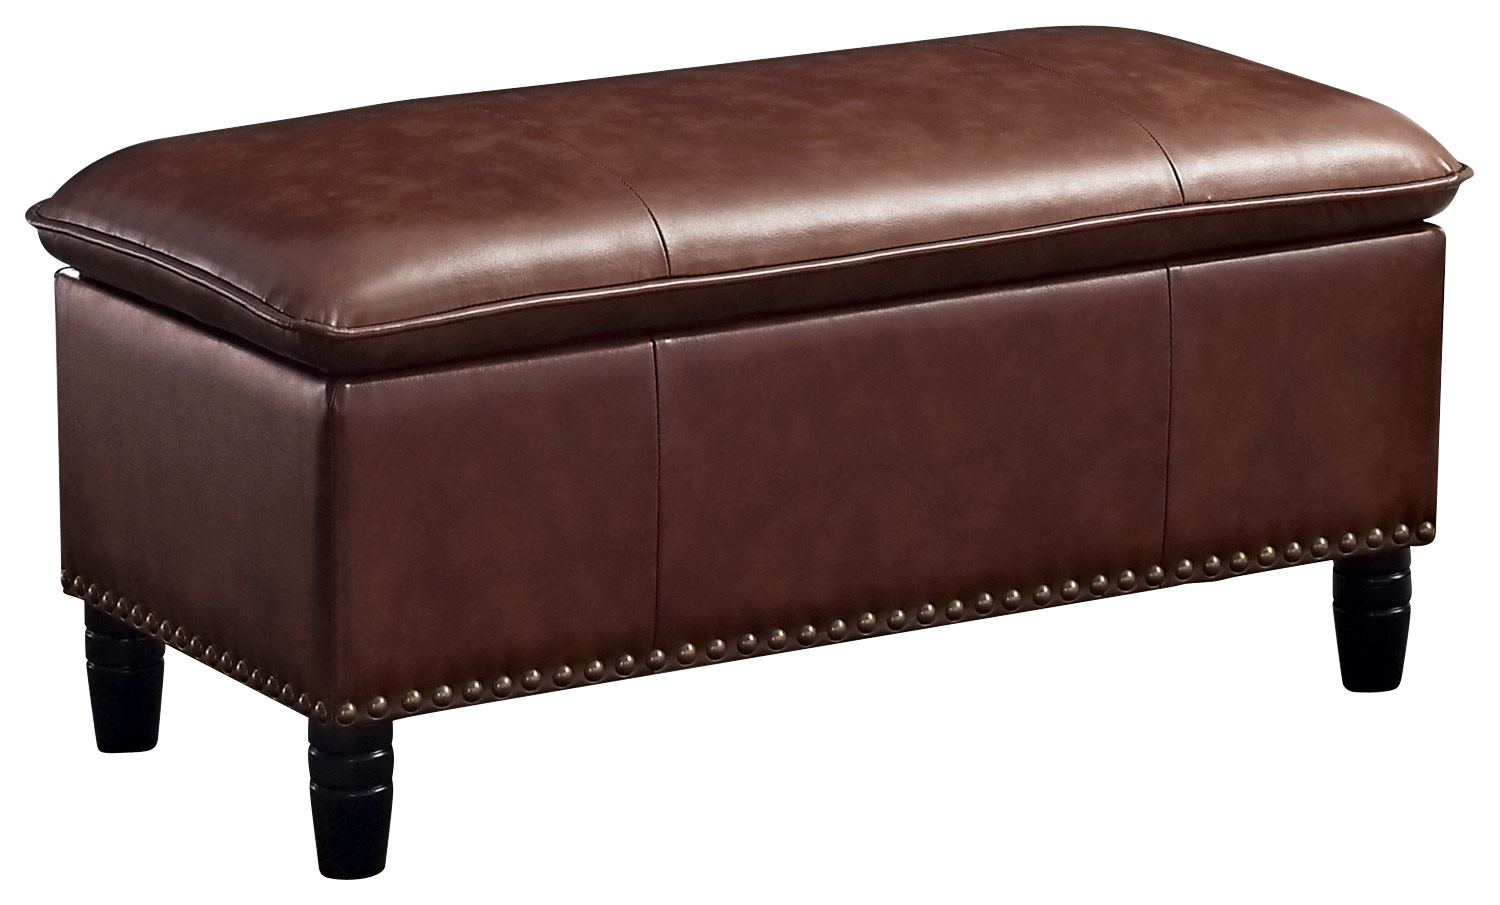 Simpli Home - Emily Rectangular Polyurethane Faux Leather Bench Ottoman With Inner Storage - Cognac was $231.99 now $174.99 (25.0% off)